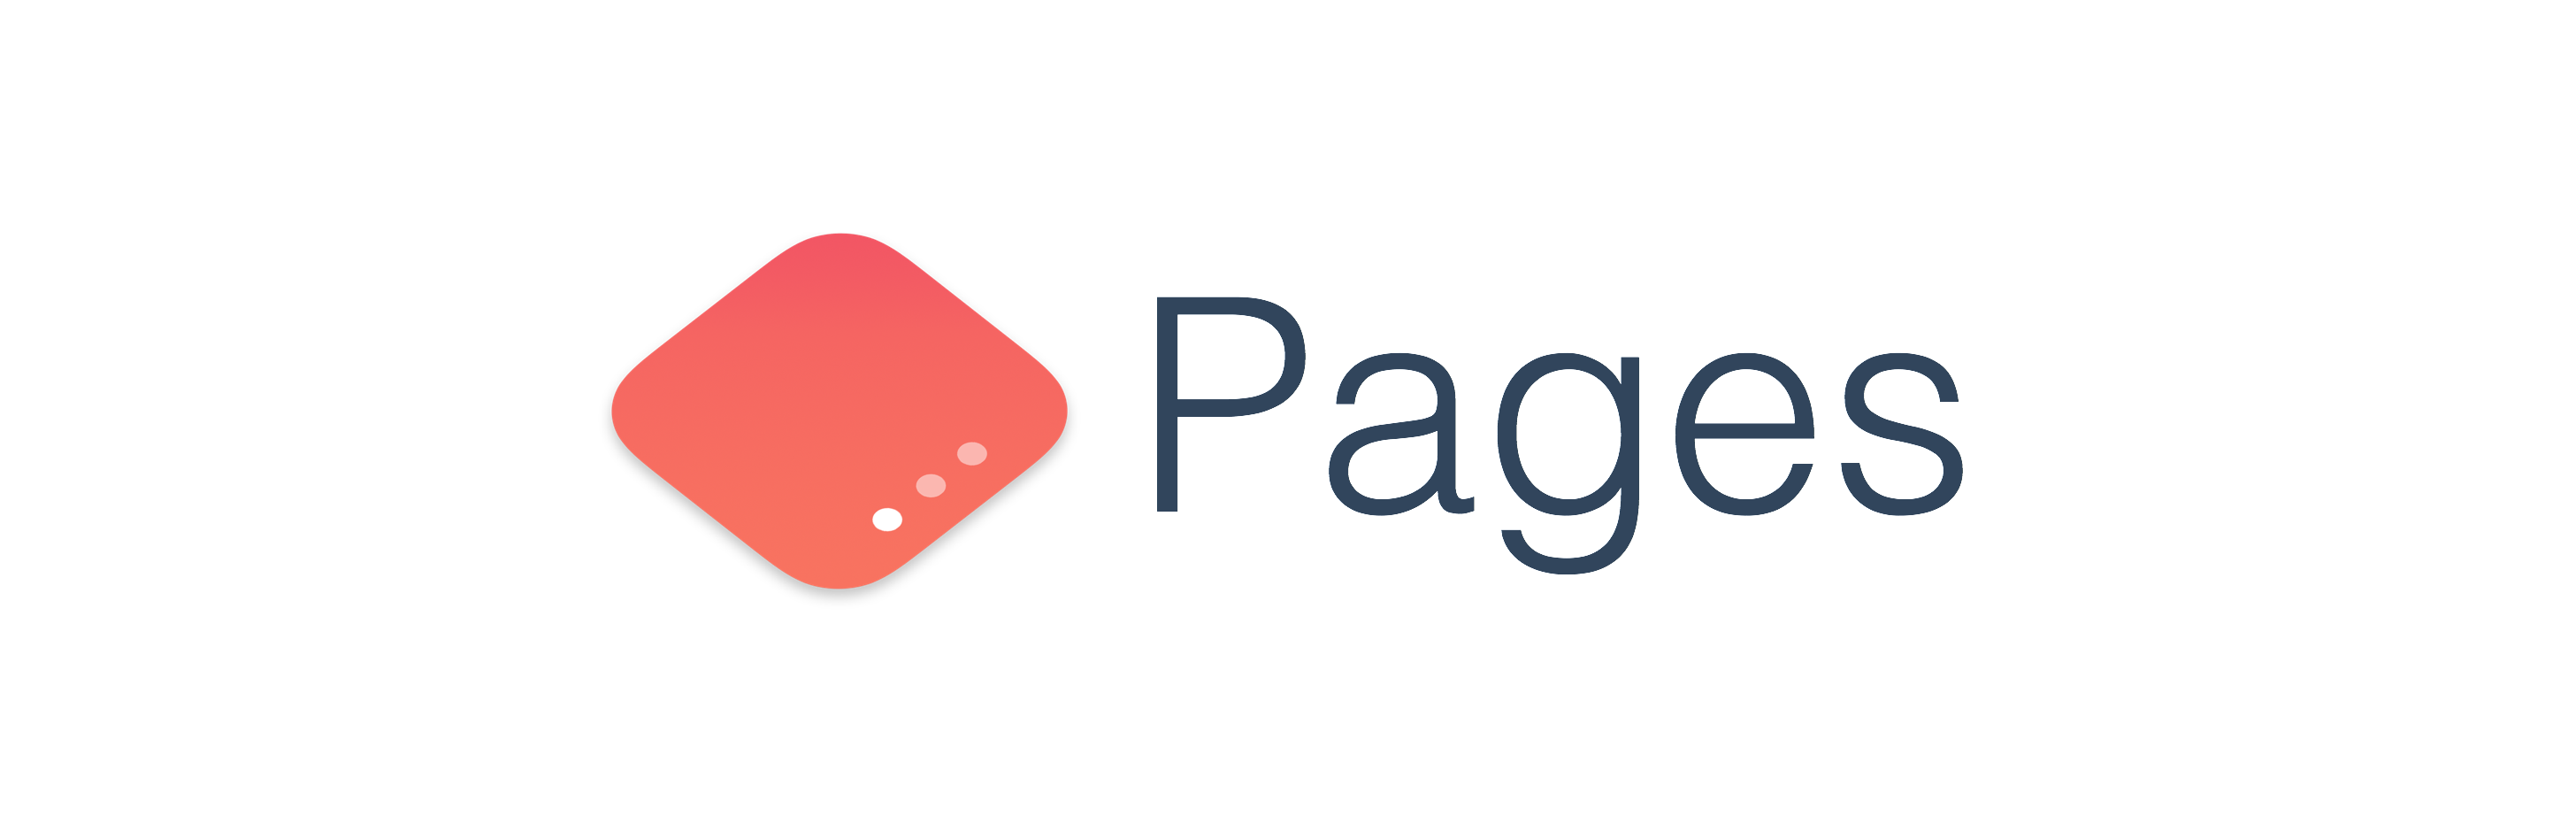 Pages logo